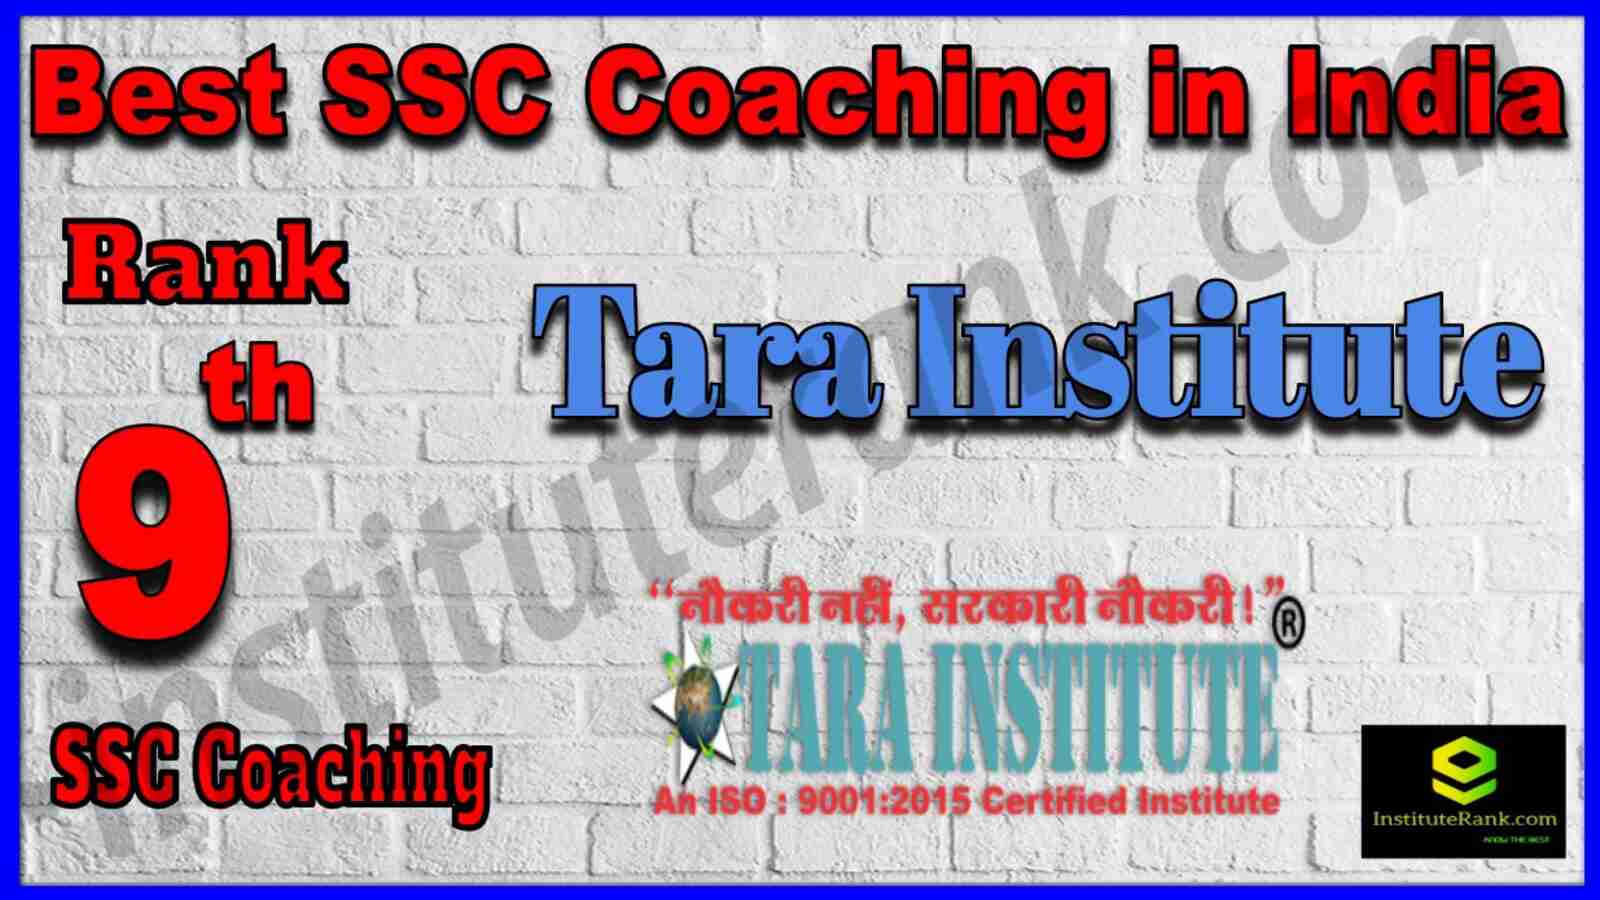 Rank 9 Best SSC Coaching in India